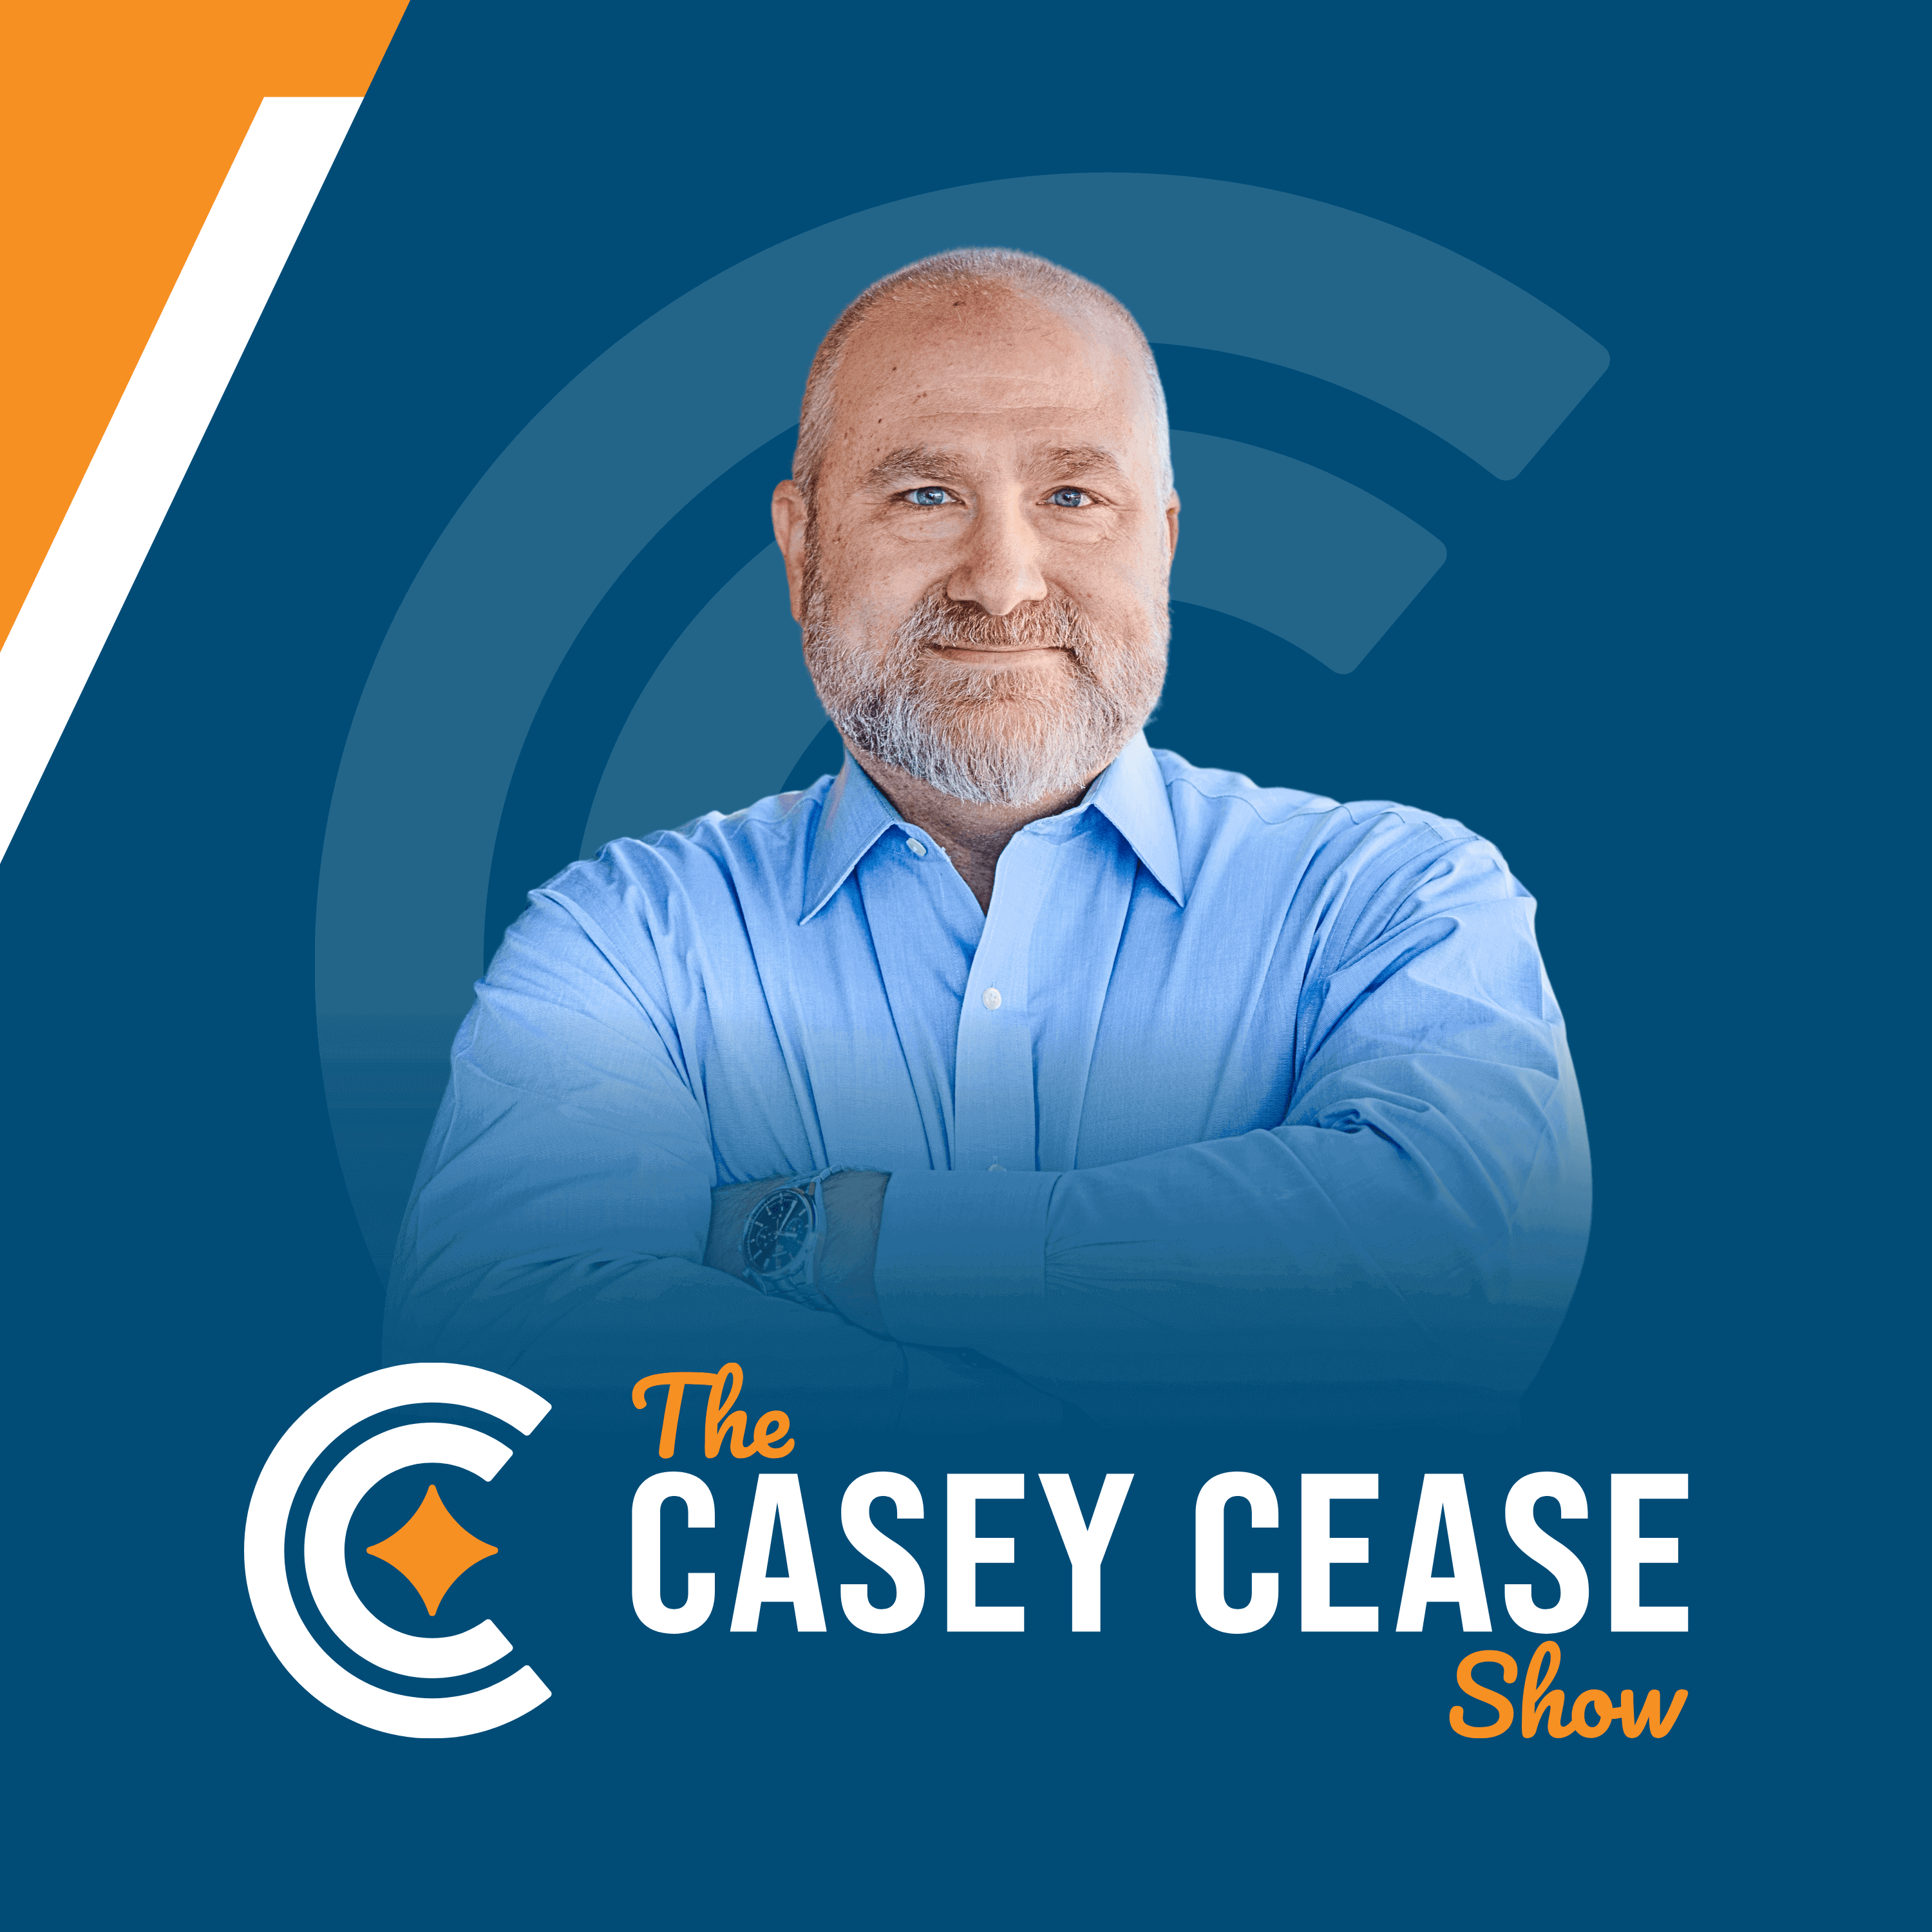 Artwork for The Casey Cease Show